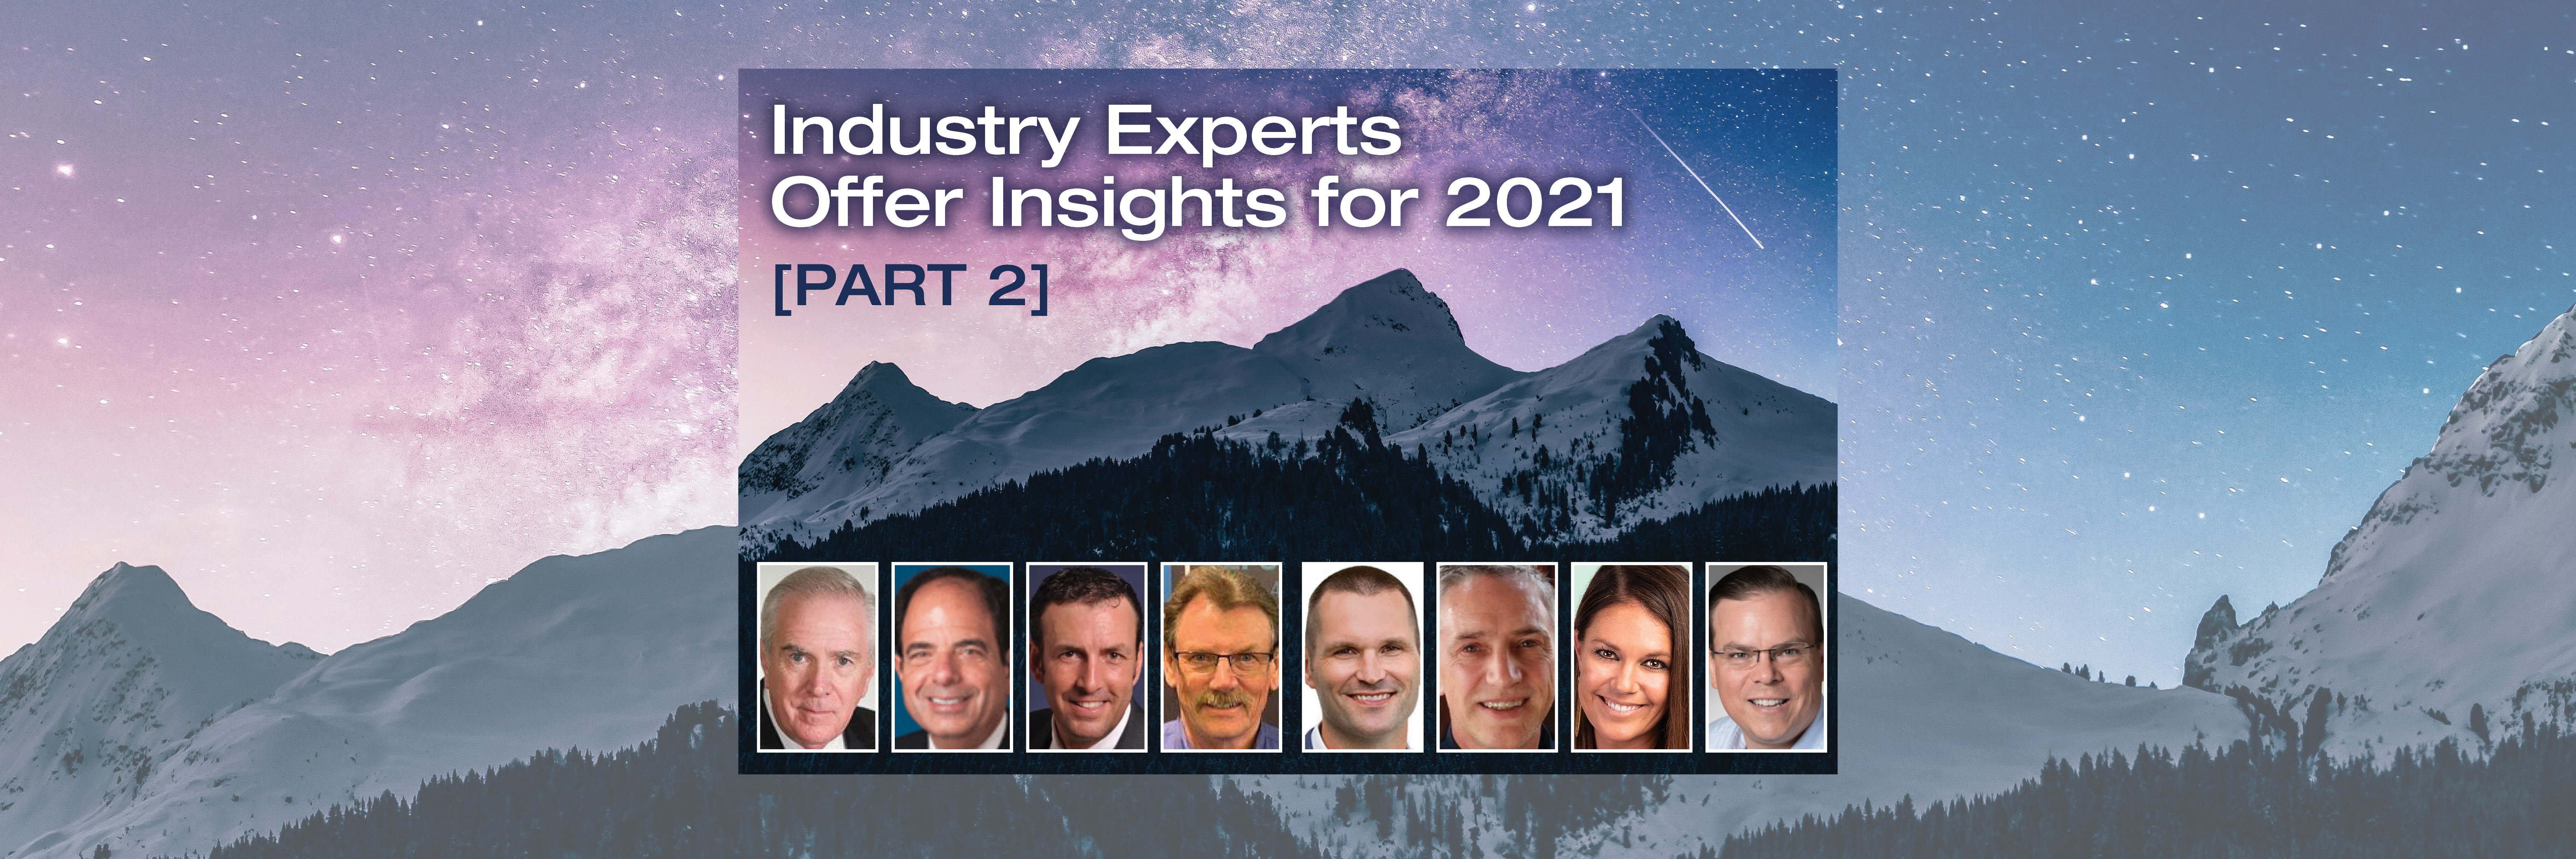 Industry Experts Offer Insights for 2021: Part II